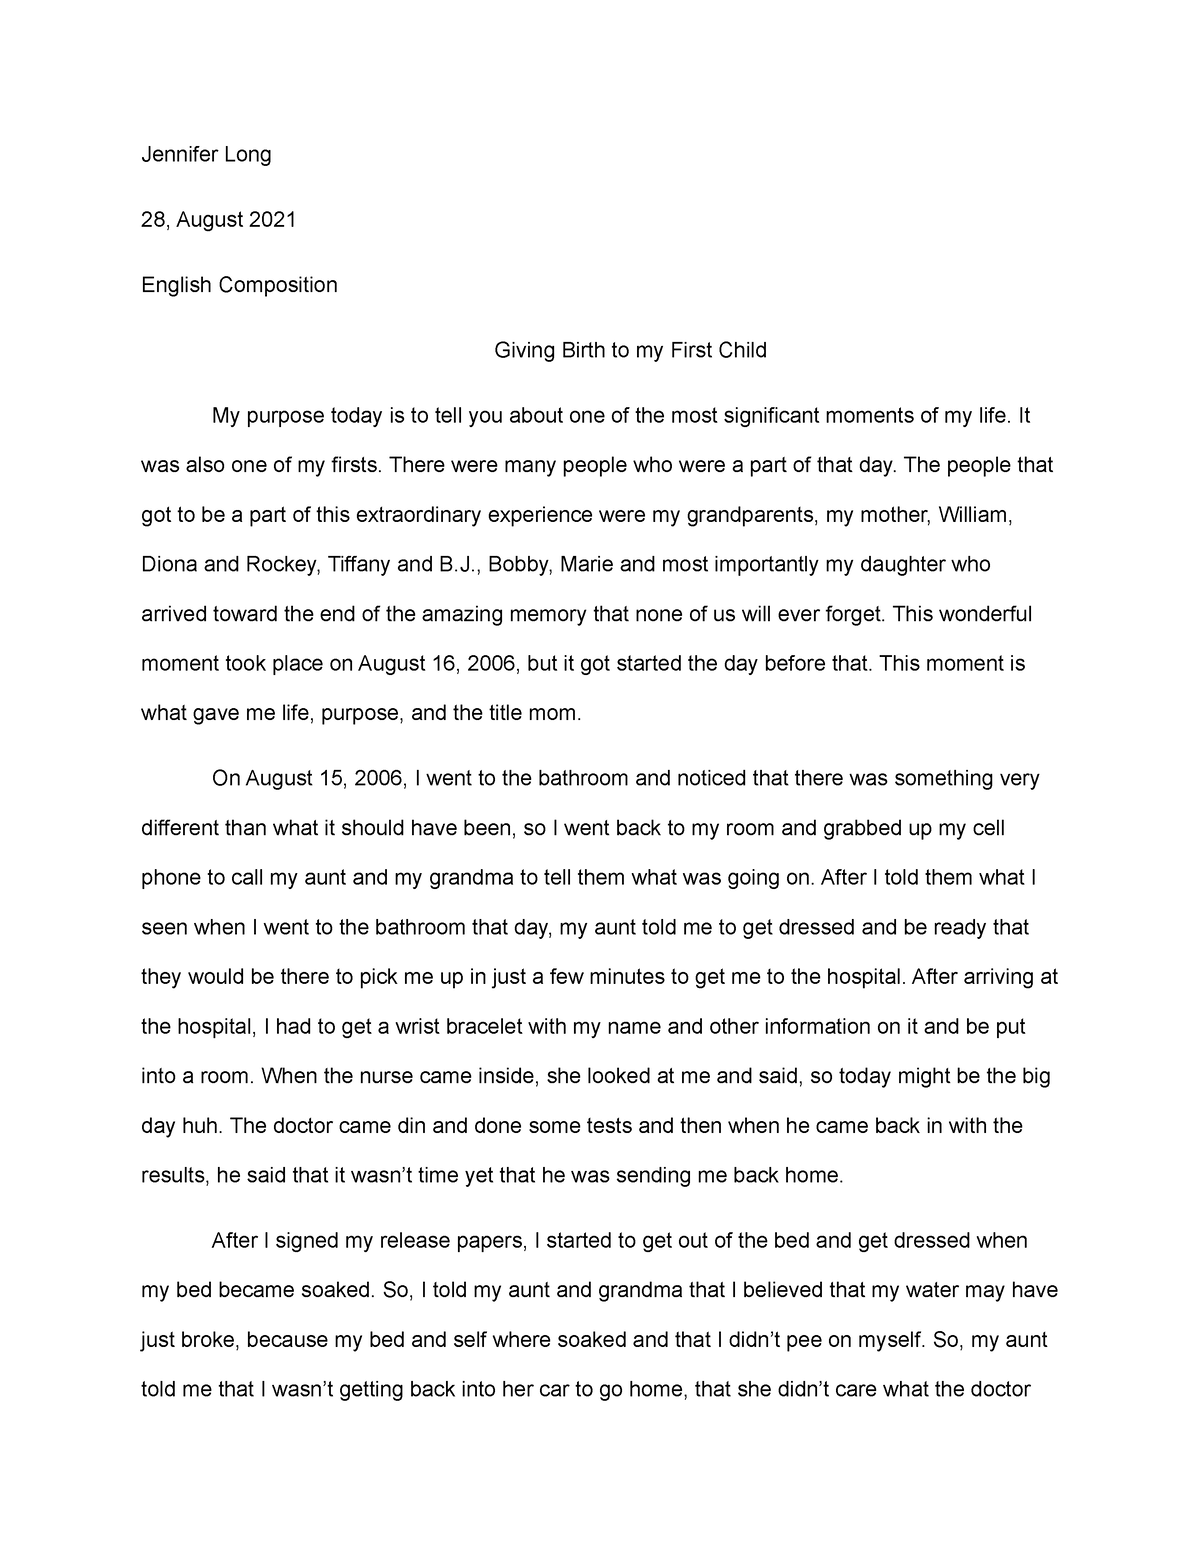 narrative essay about giving birth